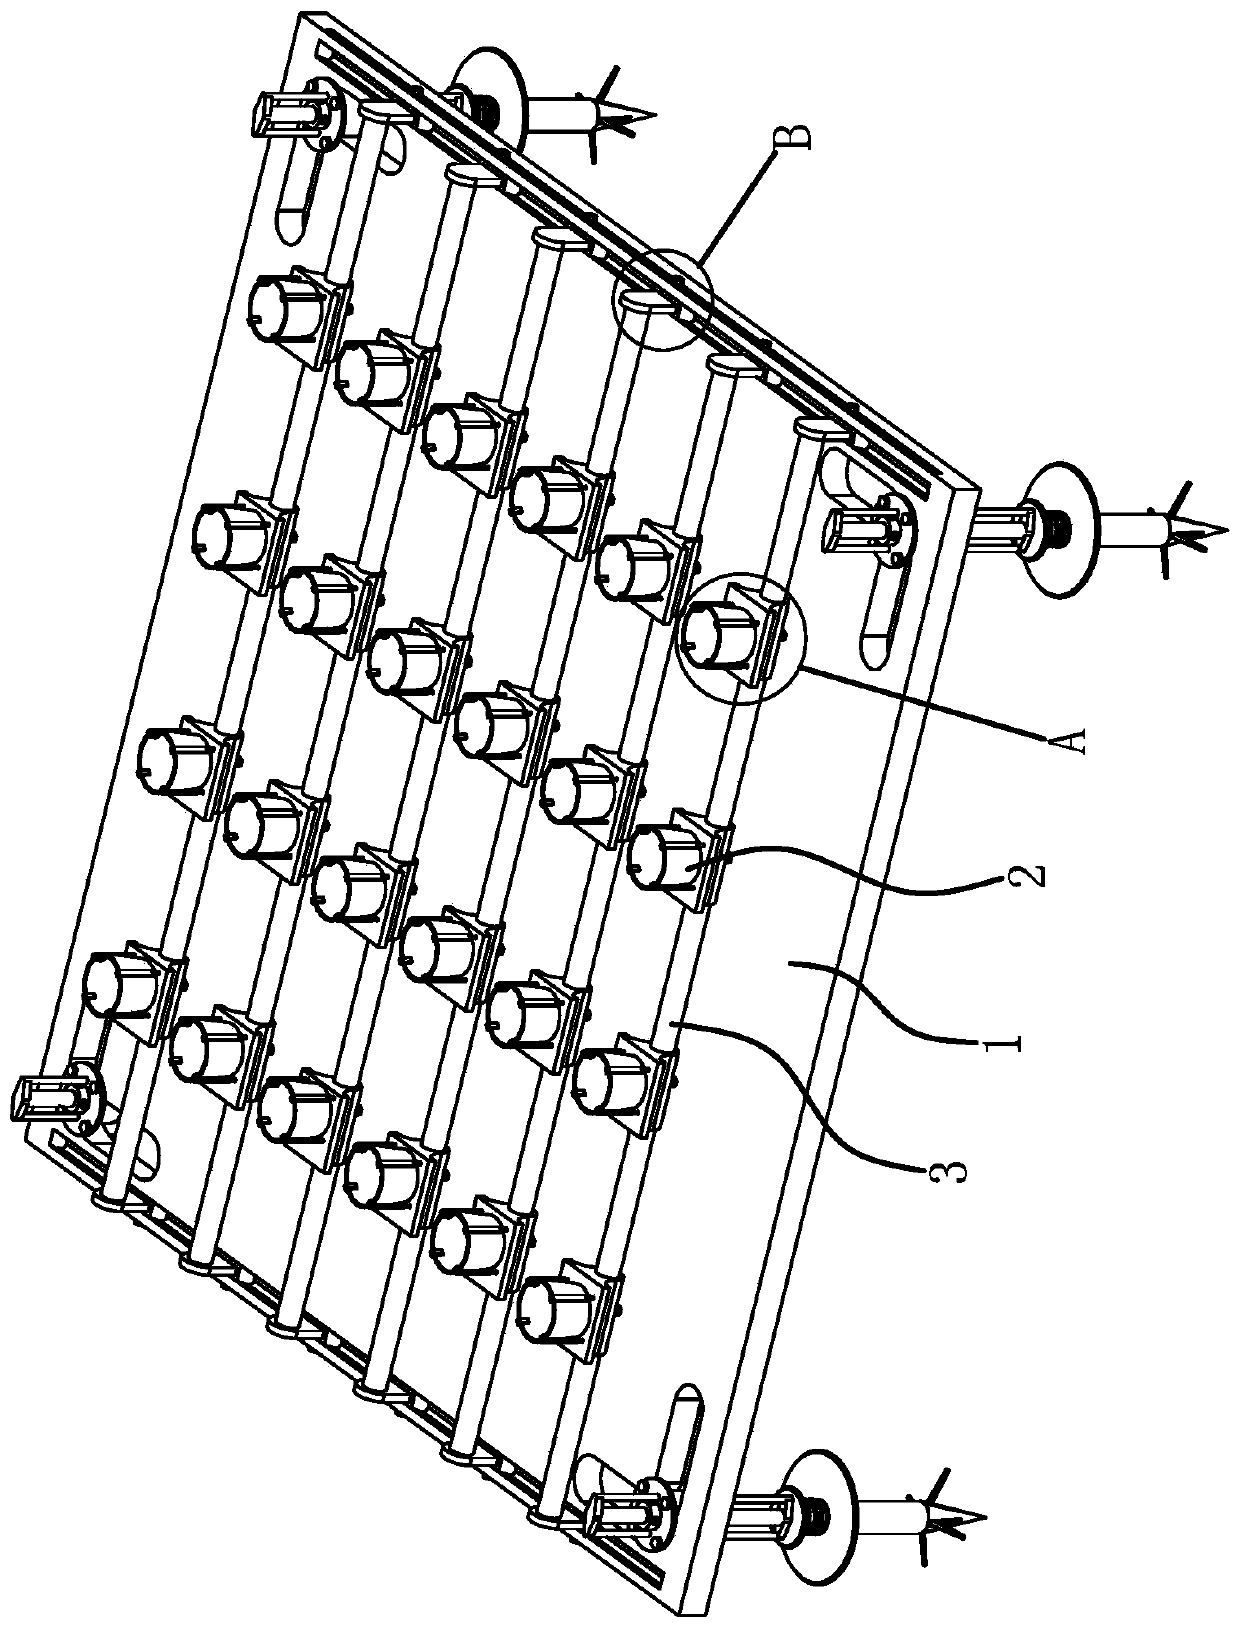 Substrate structure of a seabed coral cultivation device